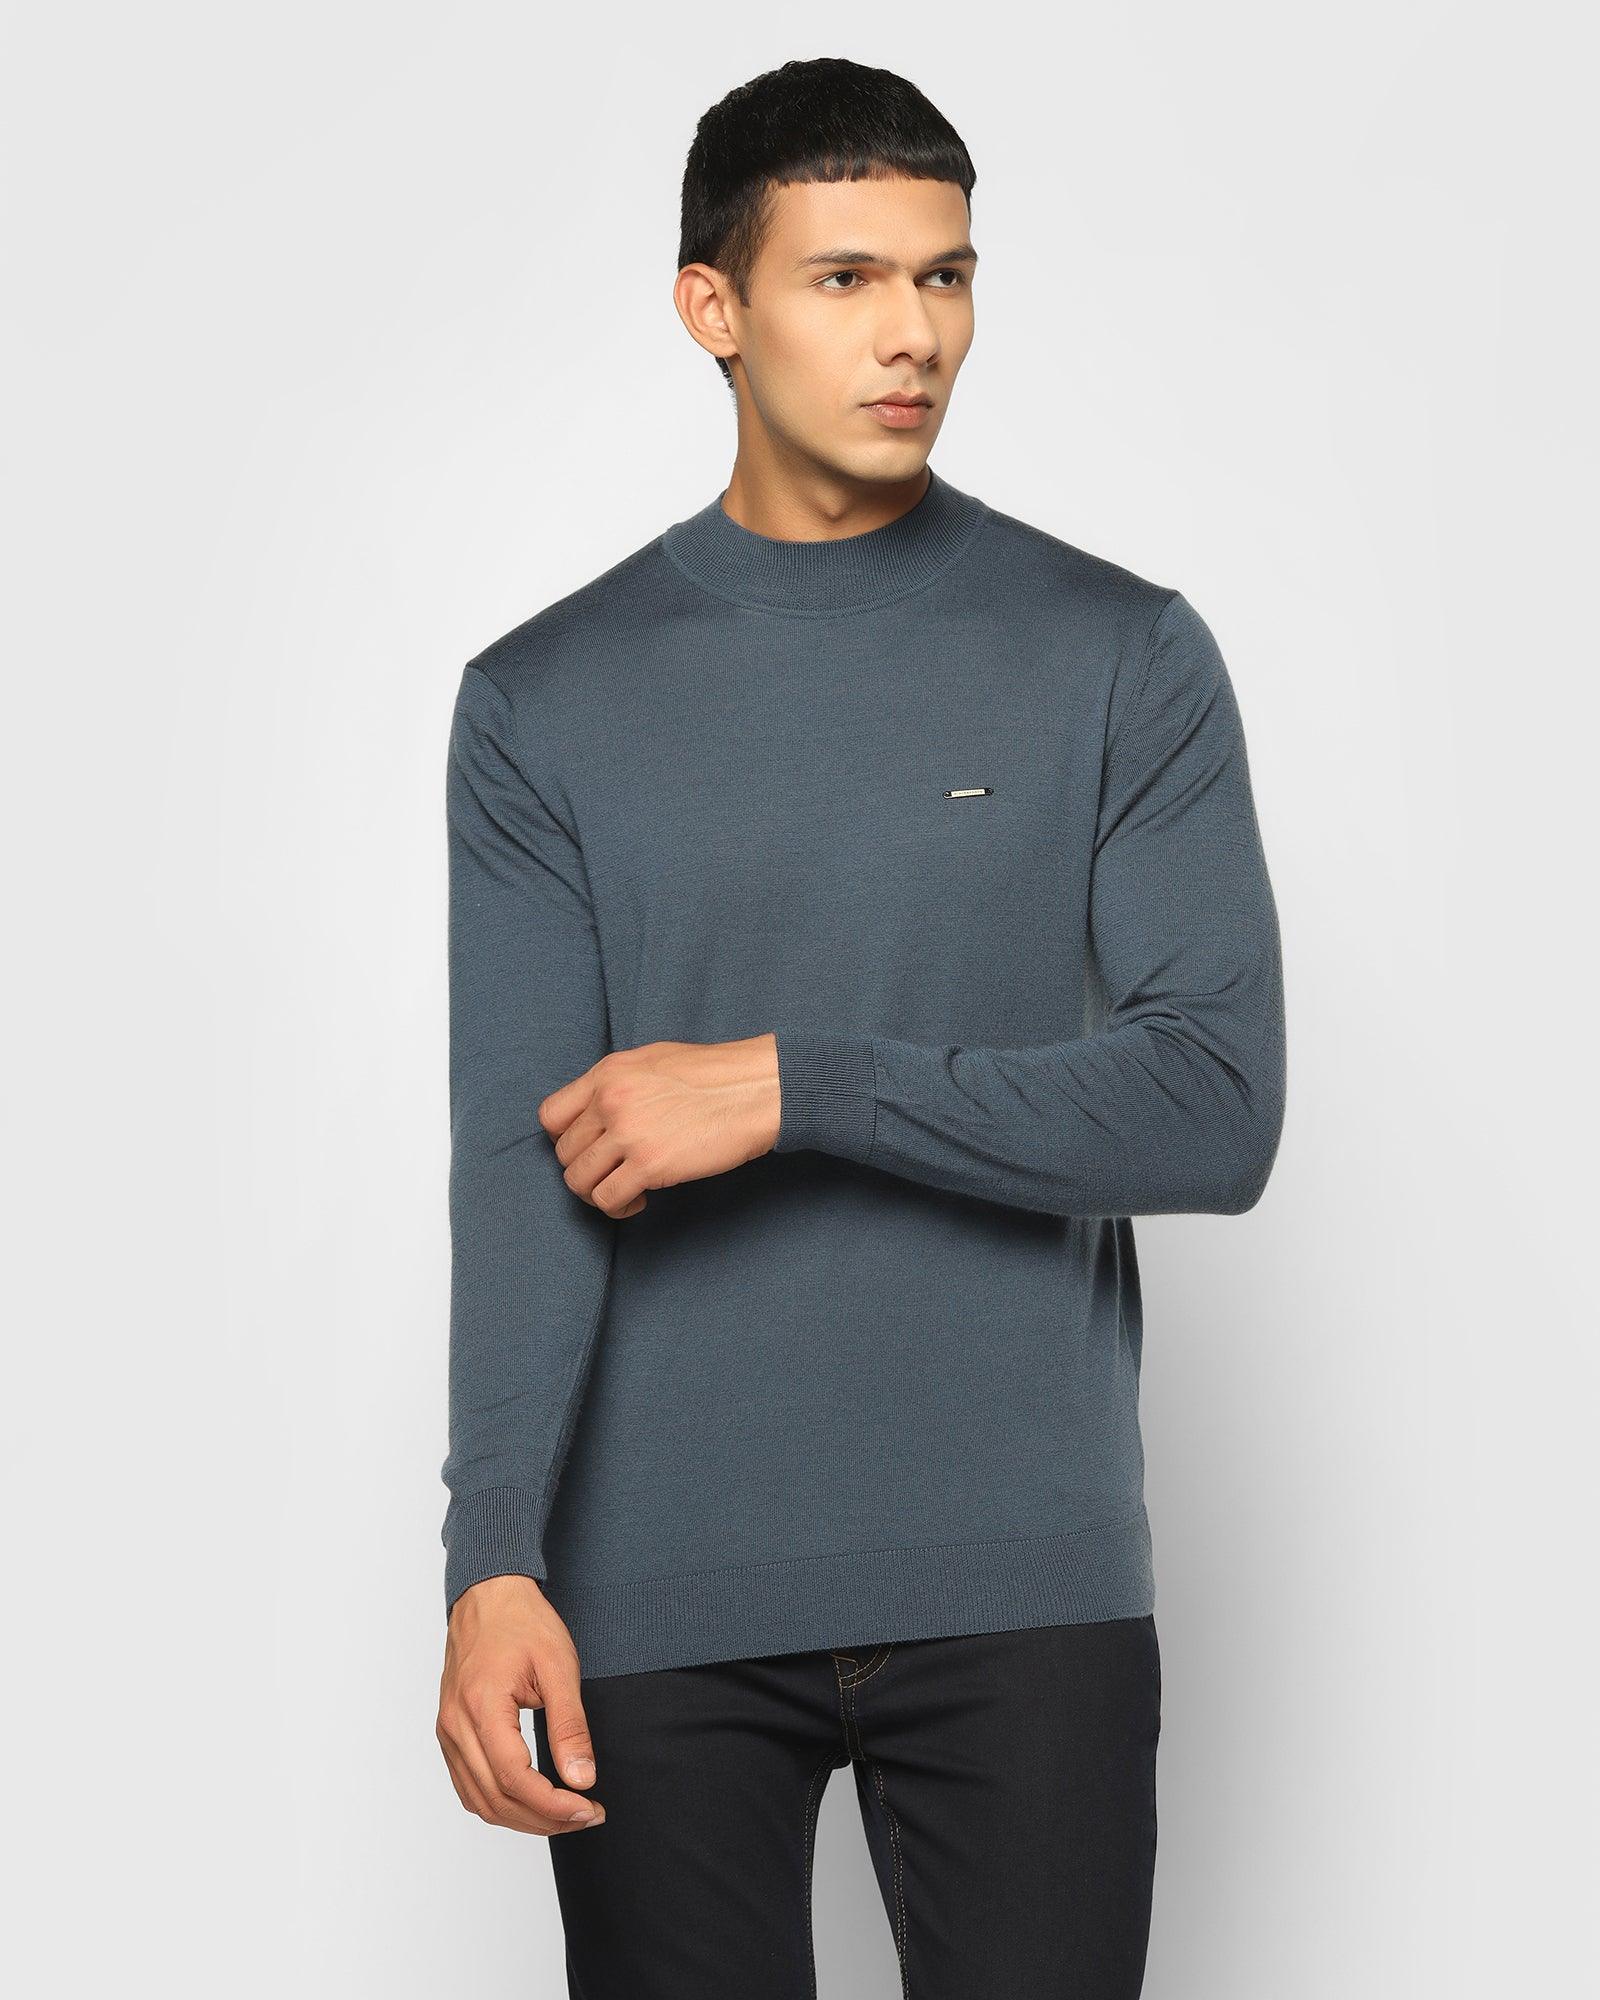 Stylized Collar Placid Blue Solid Sweater - Domin